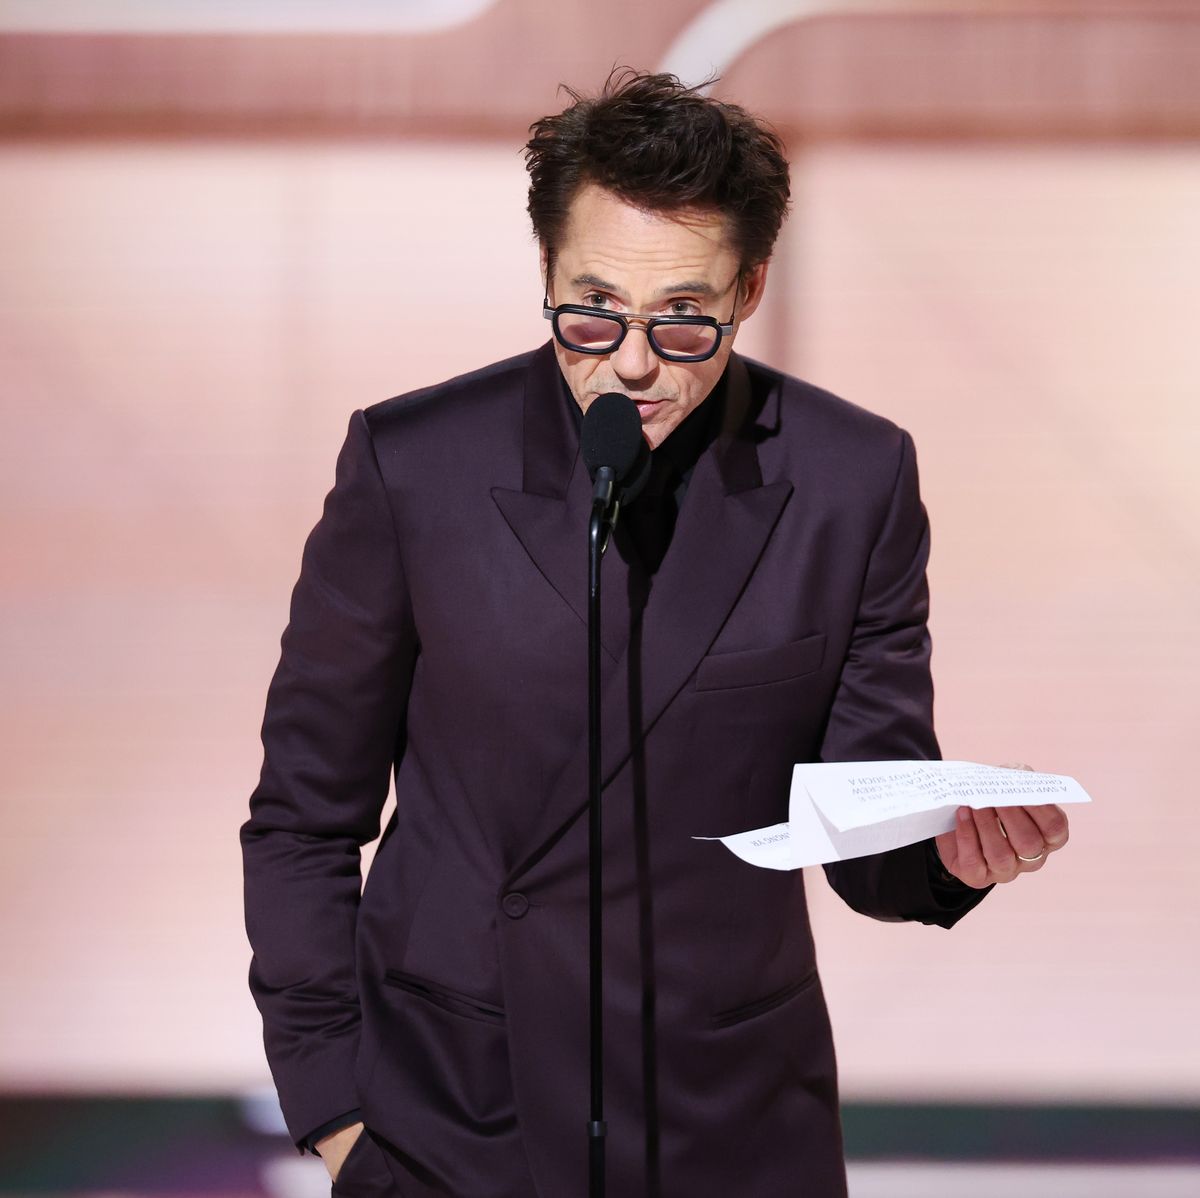 https://hips.hearstapps.com/hmg-prod/images/robert-downey-jr-accepts-the-award-for-best-performance-by-news-photo-1704678431.jpg?crop=0.701xw:1.00xh;0.165xw,0&resize=1200:*